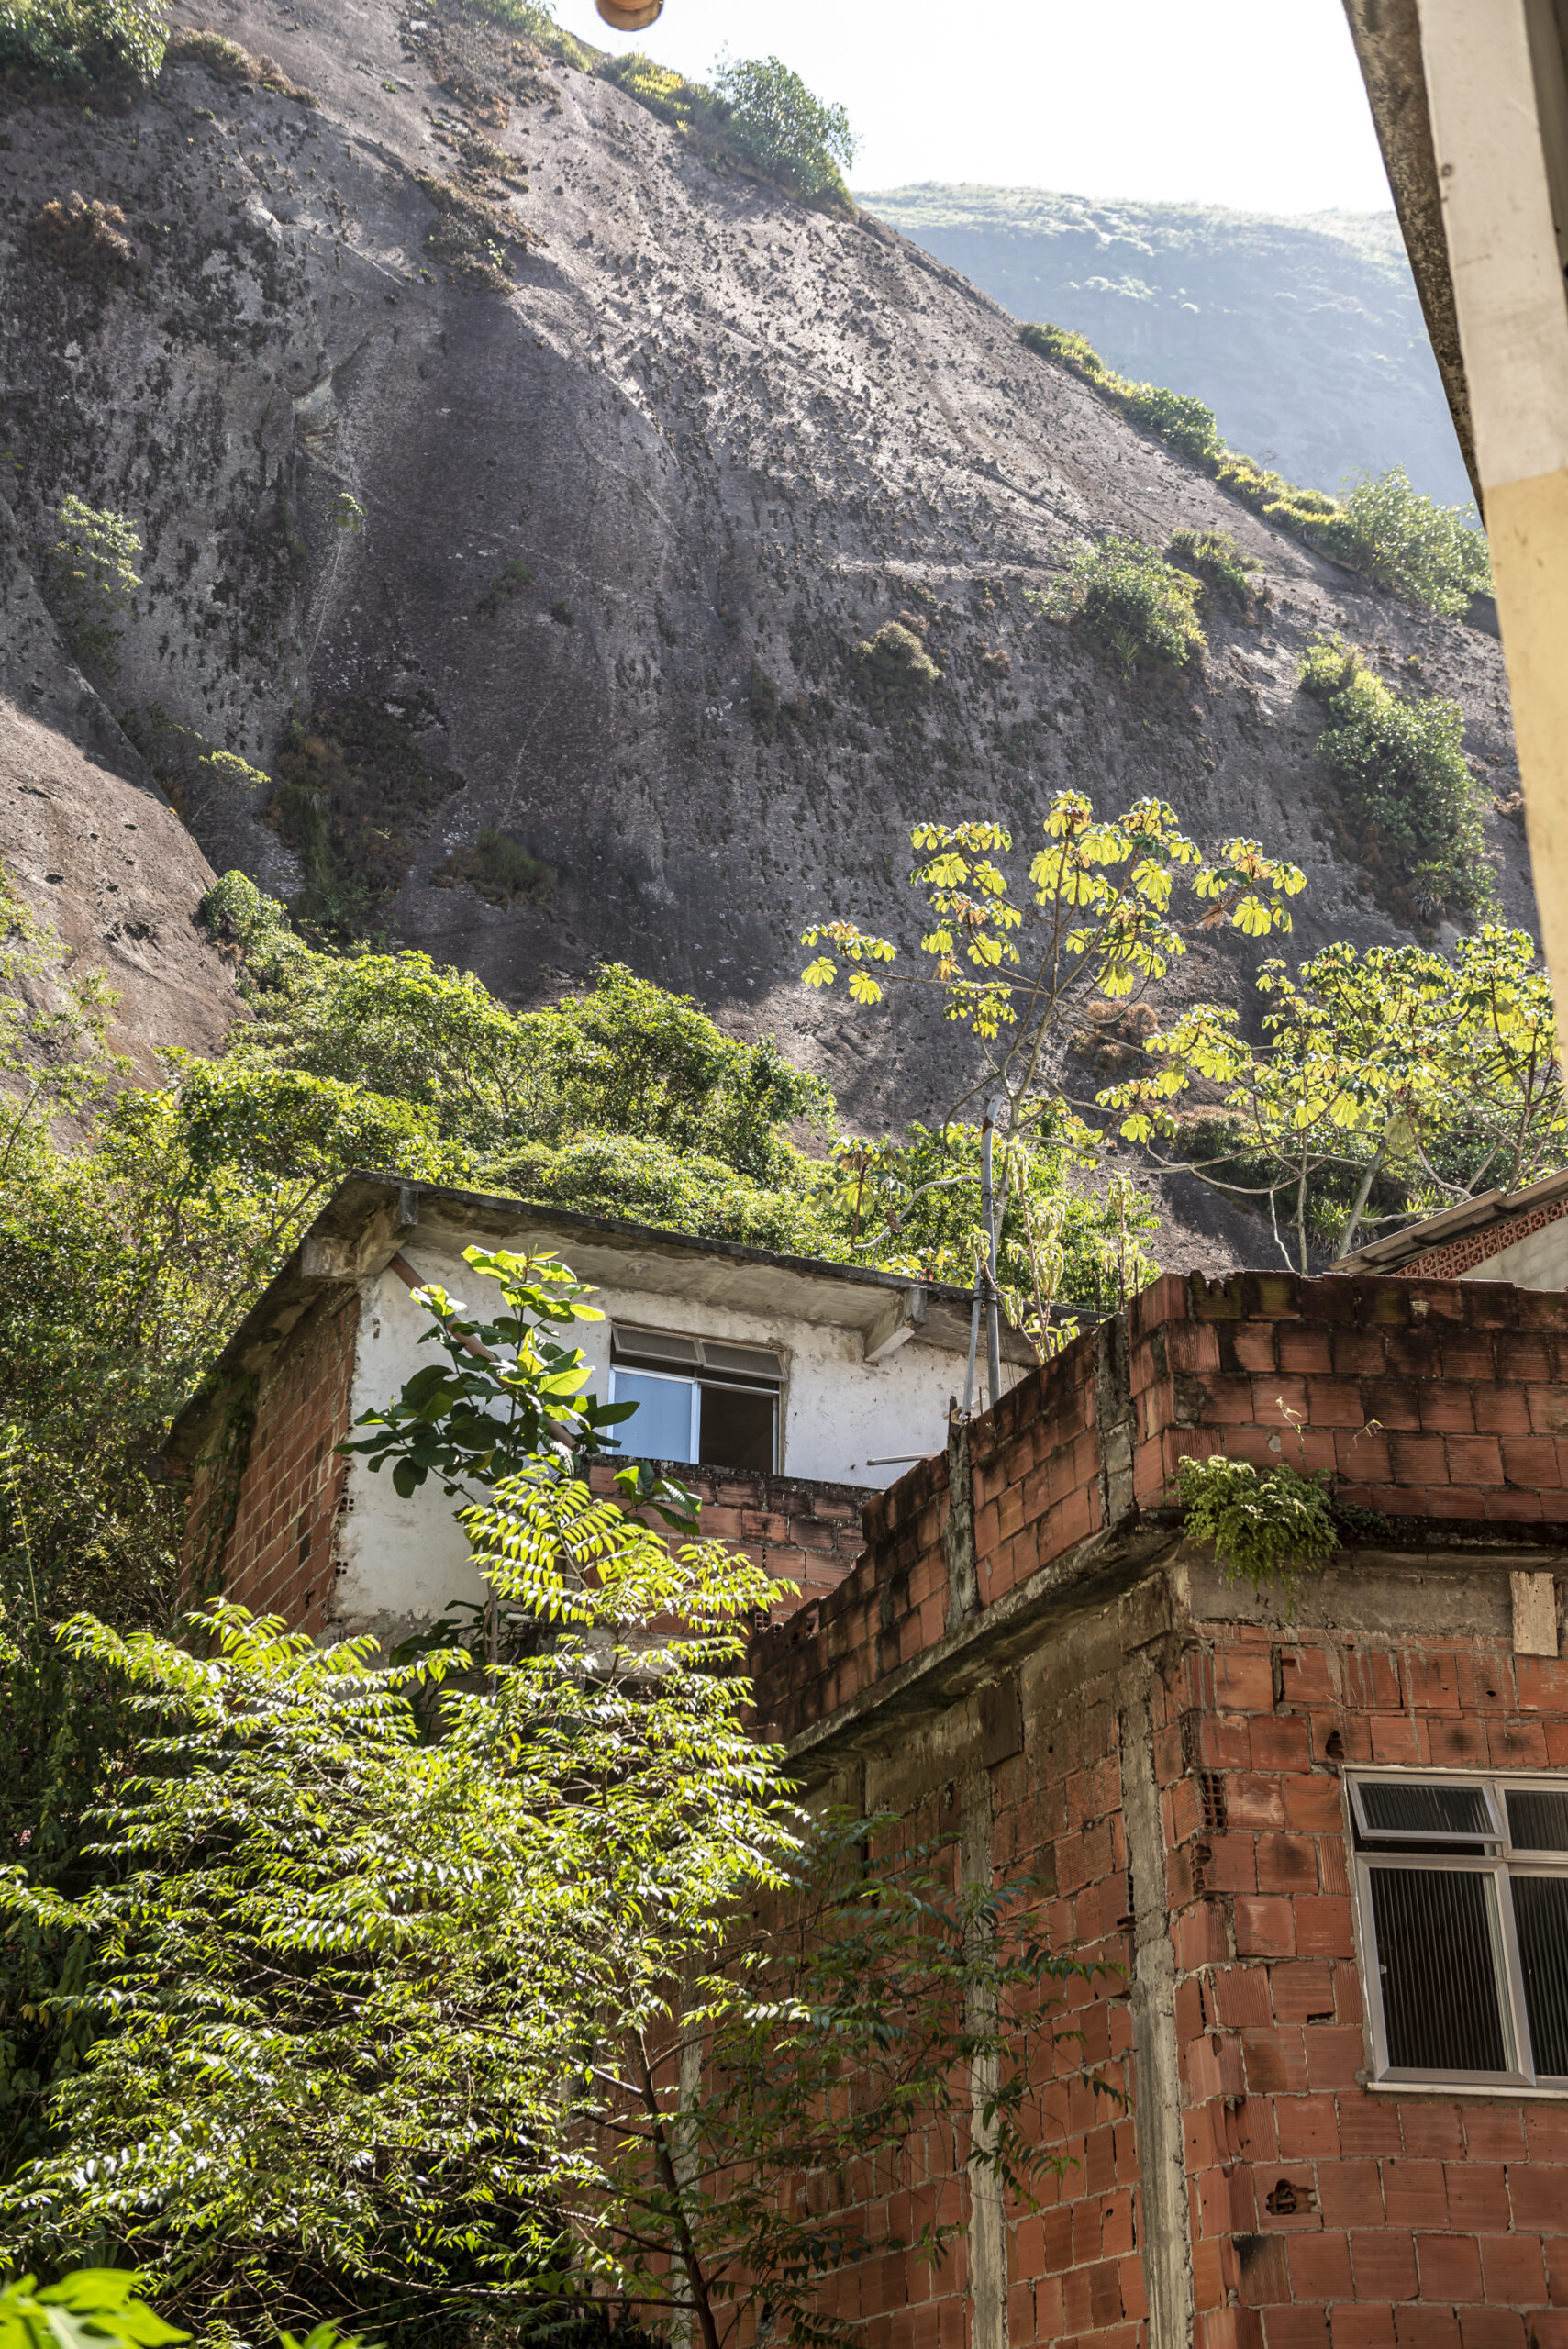 Houses very close to the rock in Jaqueira, threatened by rockfalls. Photo: Igor Albuquerque